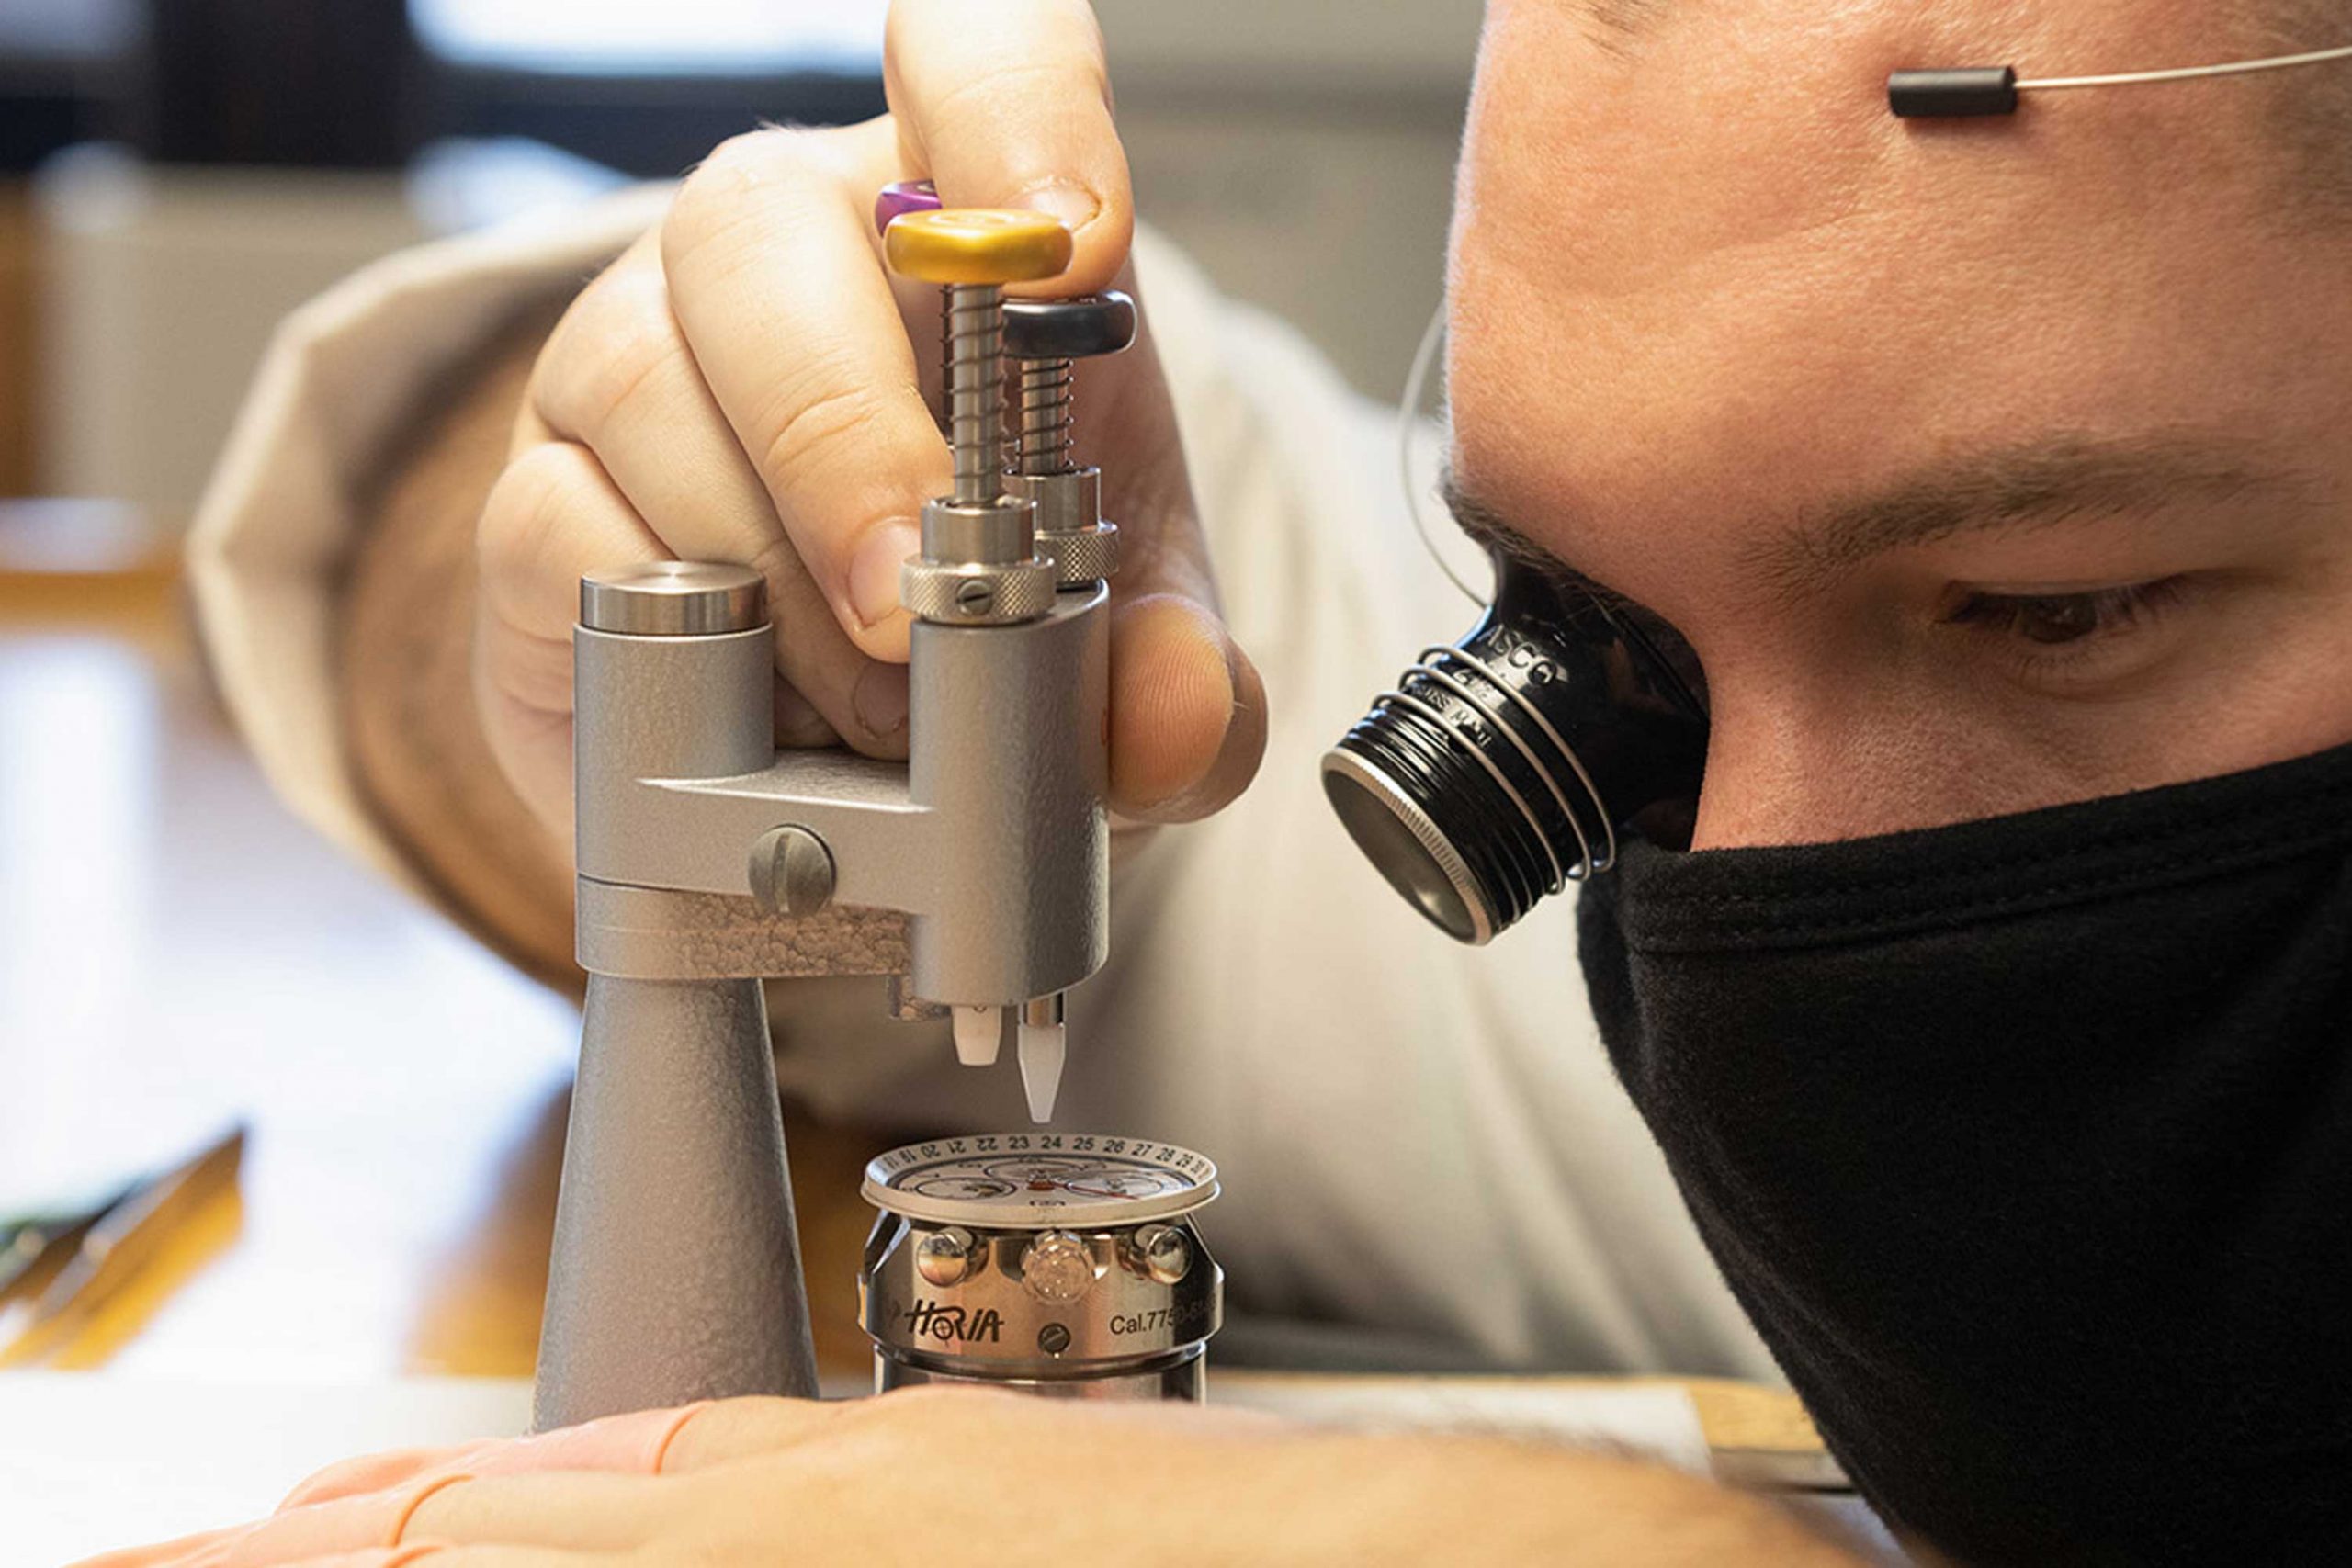 Opportunity Knocks: Join Watchmaking School while Getting Paid